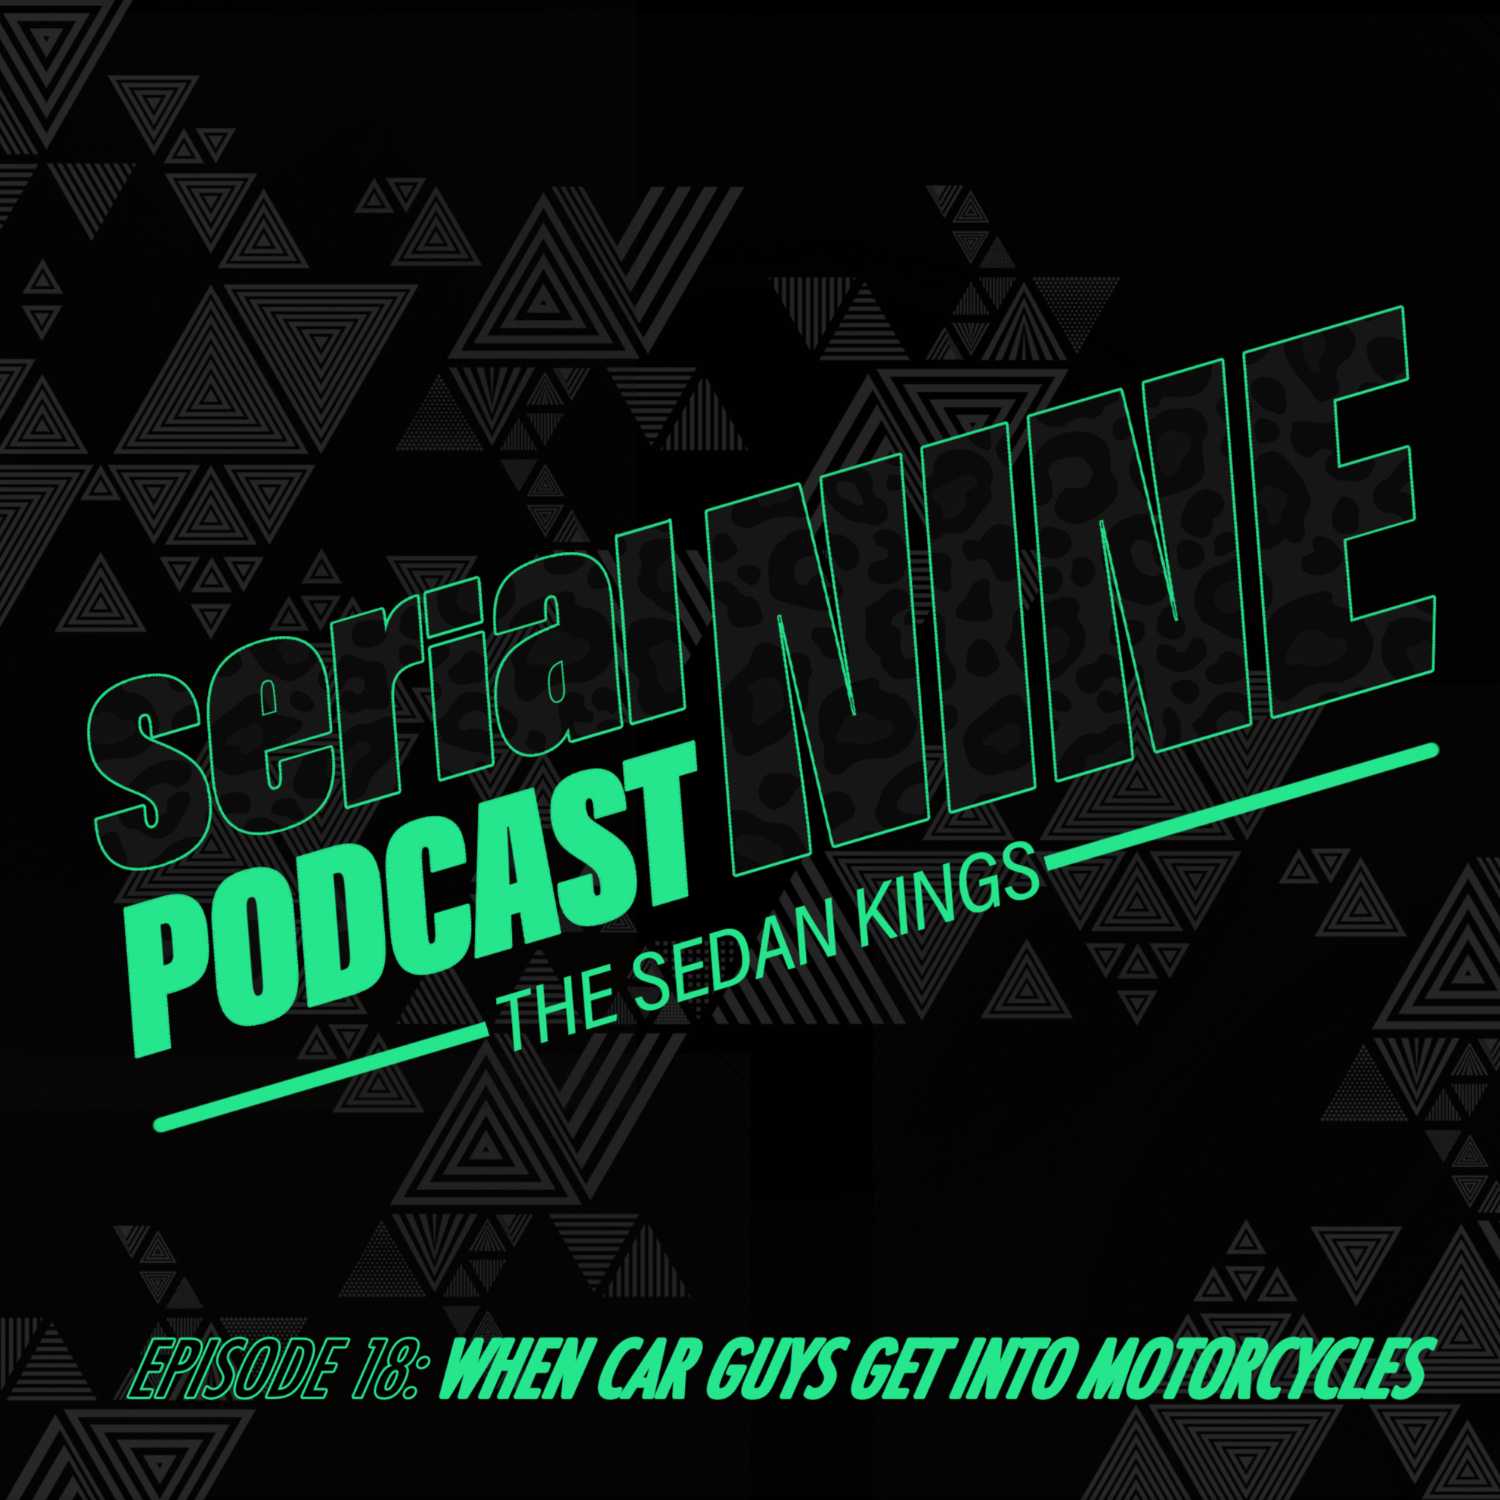 SerialPodcastNine Episode 18 When car guys get into Motorcycles